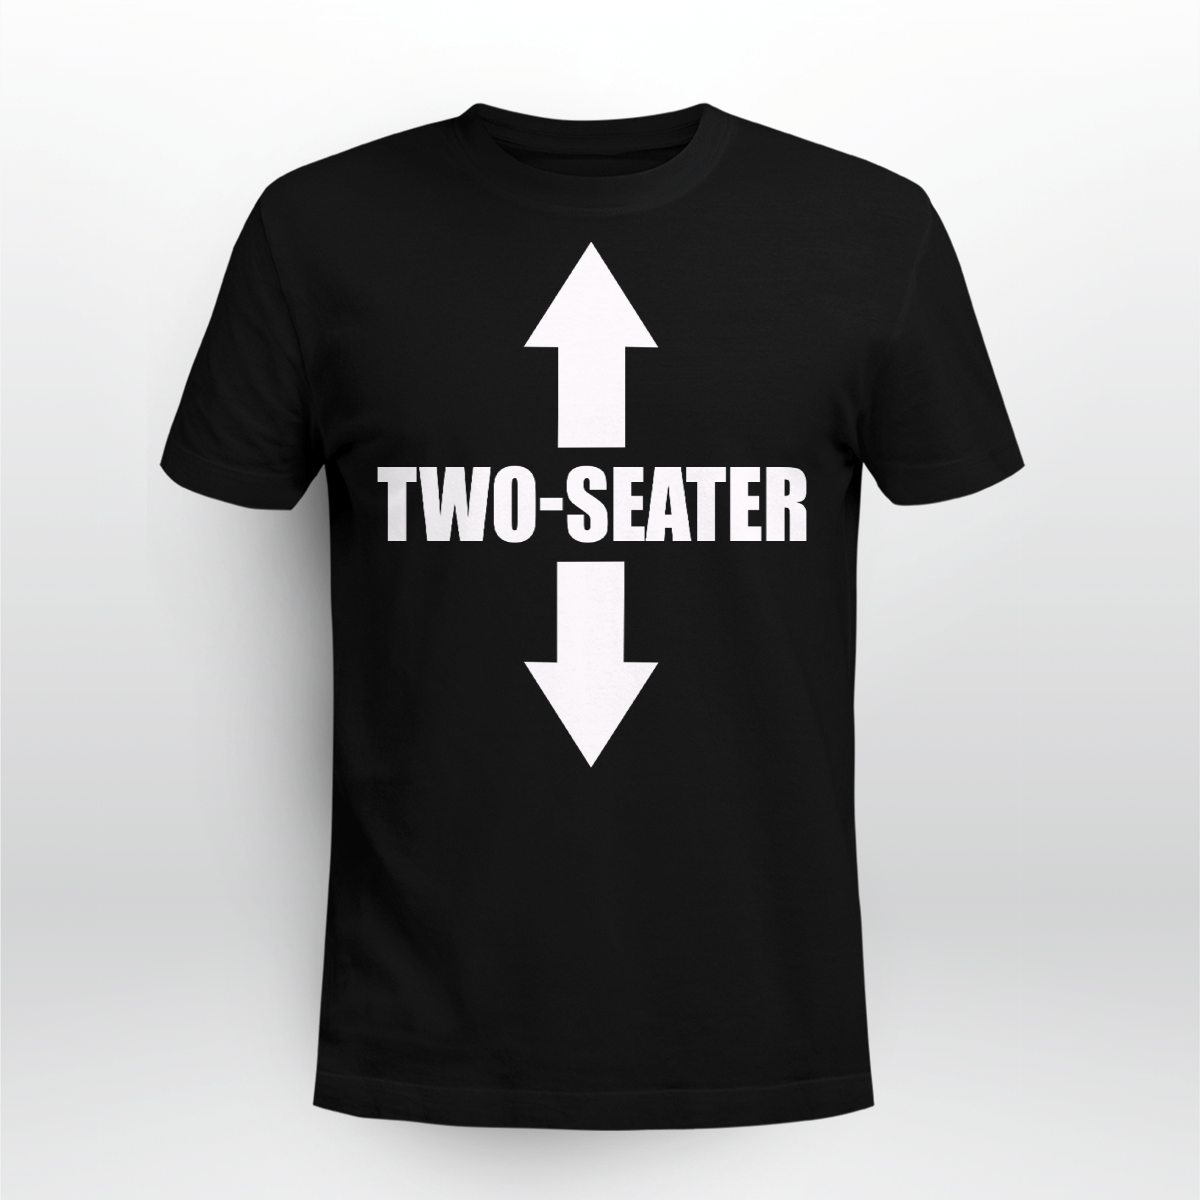 Two Seater Funny Shirt Style: Unisex T-shirt, Color: Black